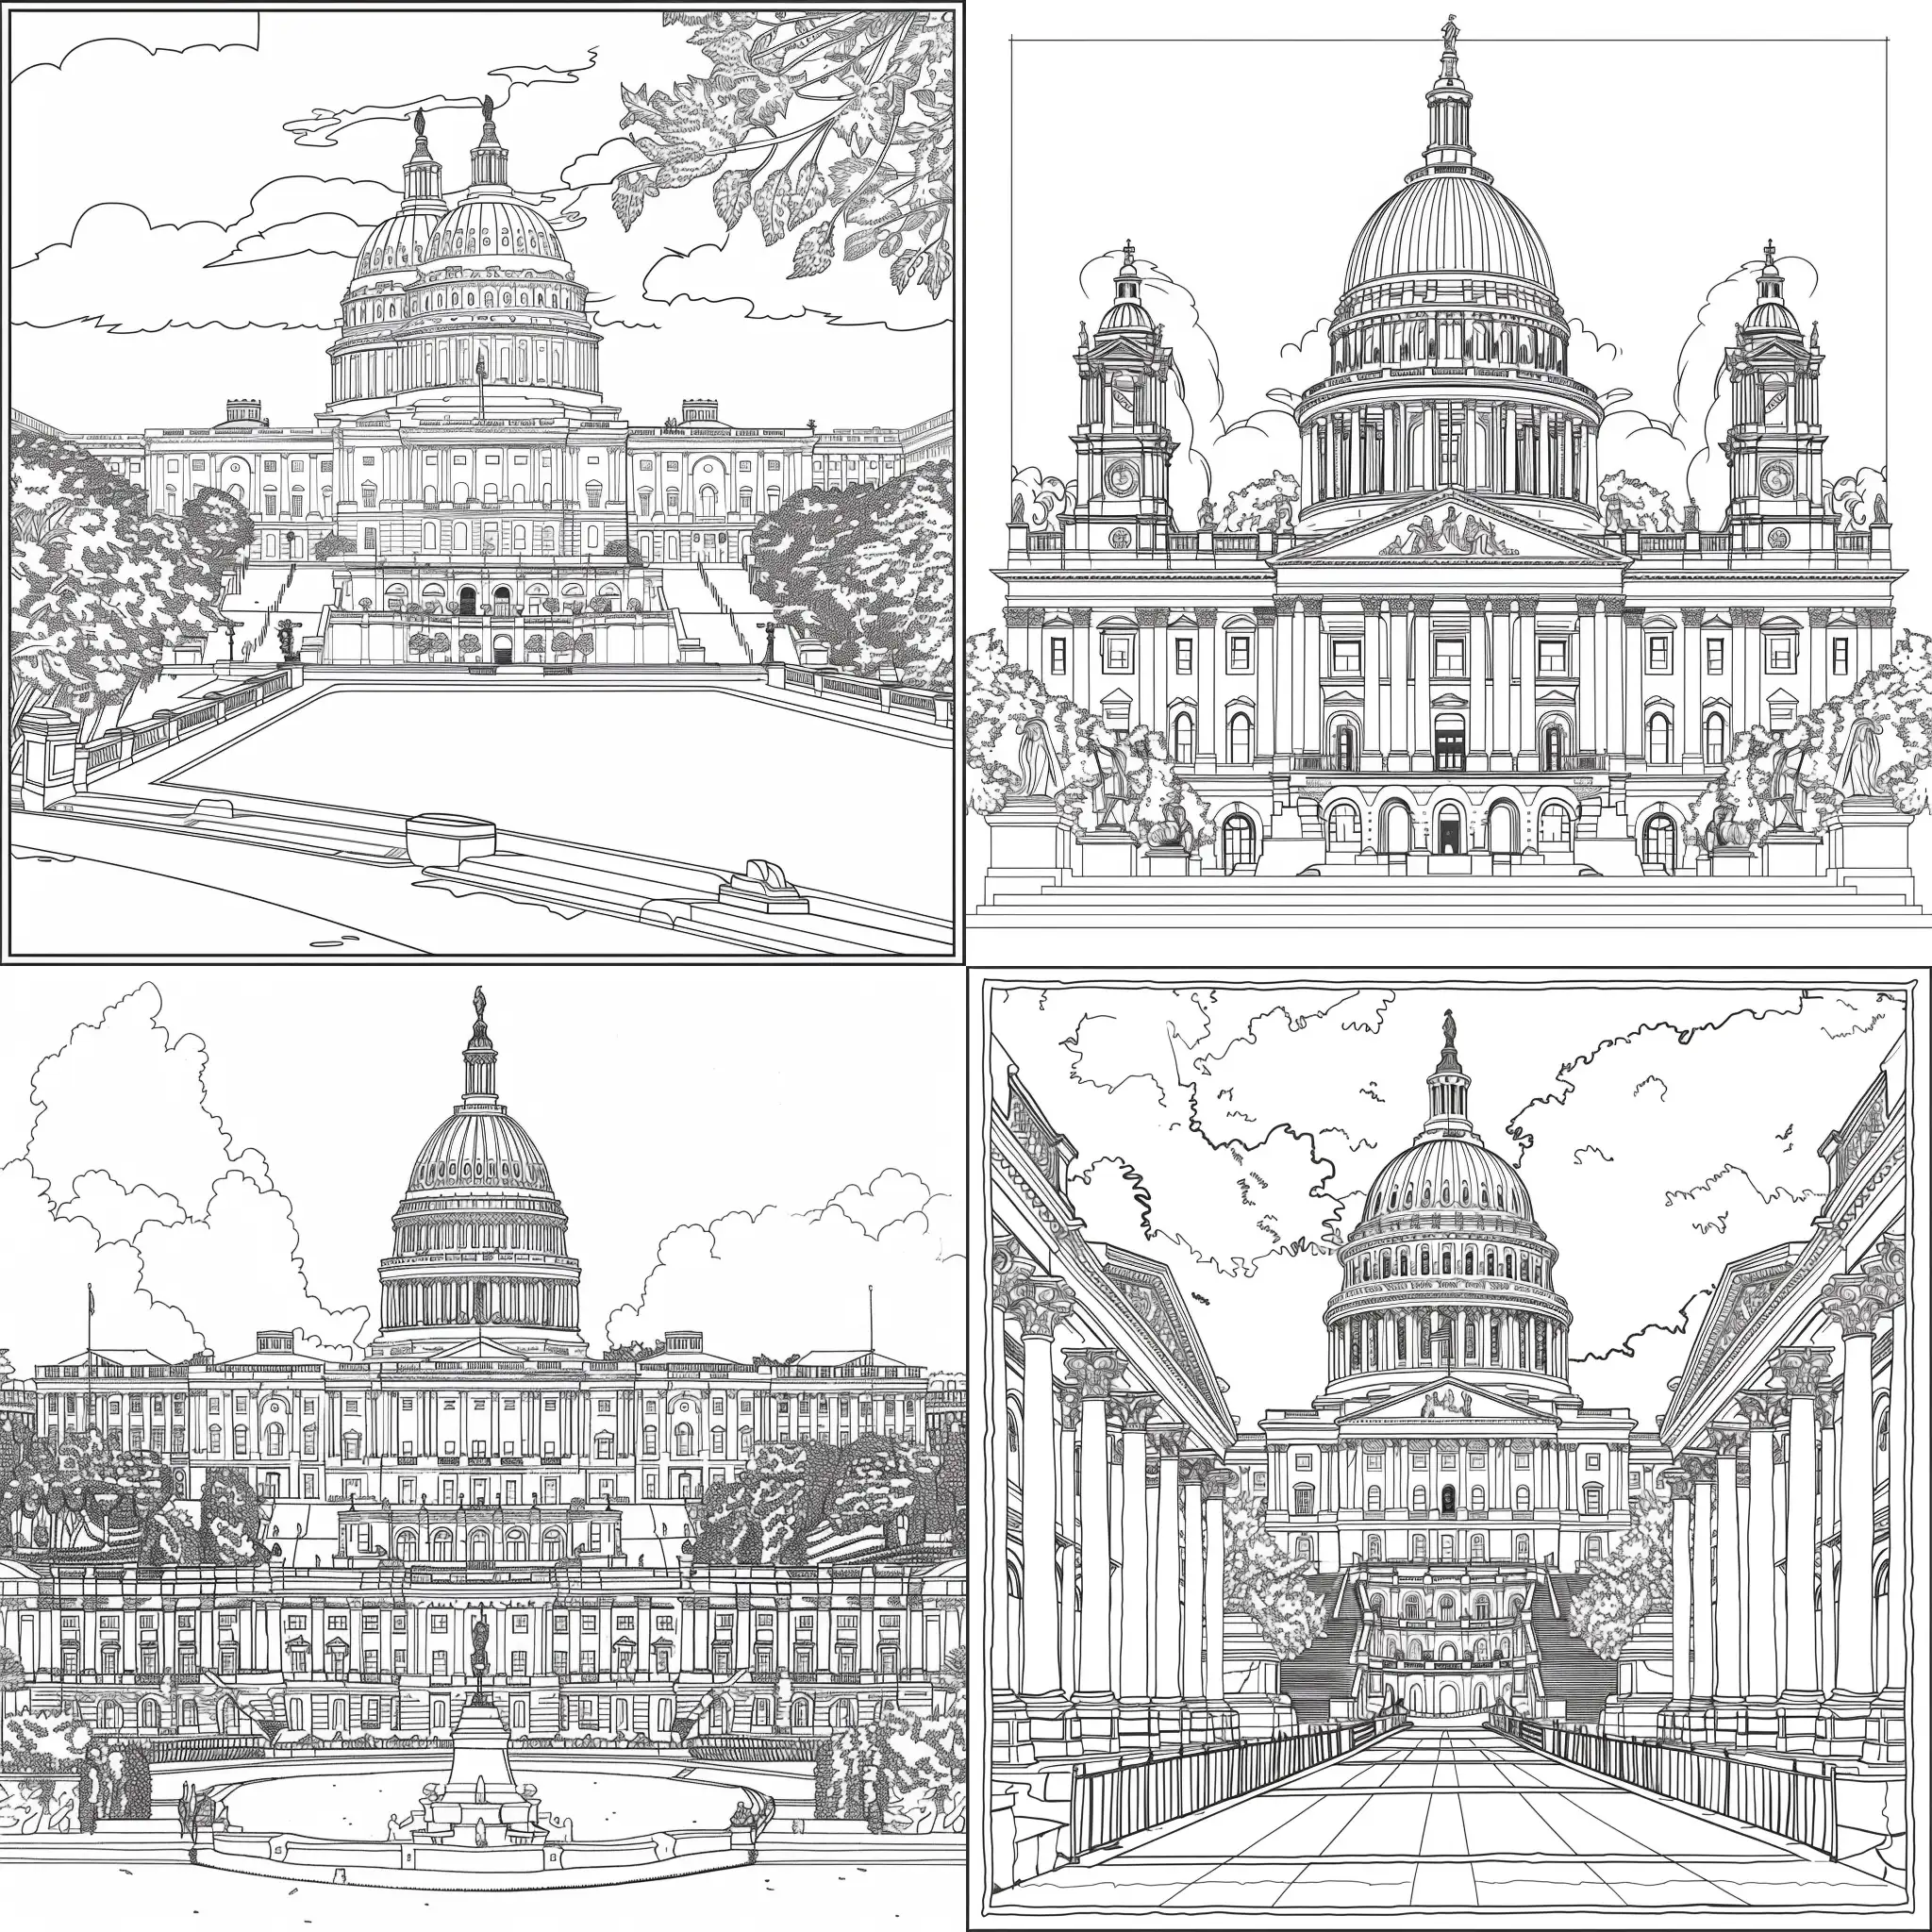 Coloring book page with a the  Capital Building in Washington DC, A:23, no frame, no background